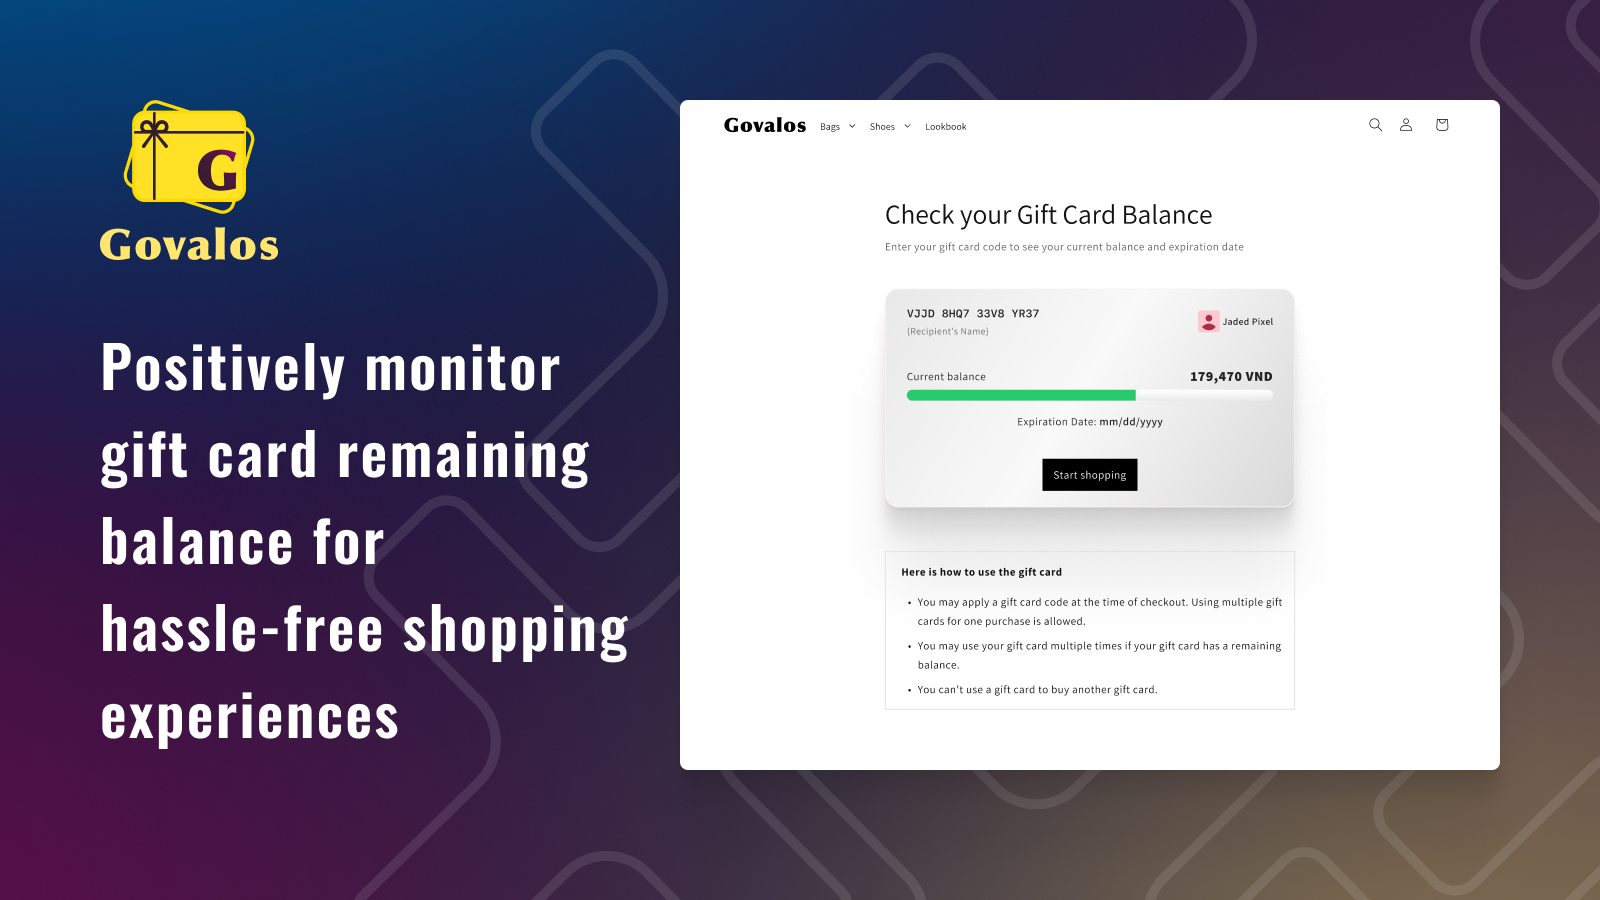 Monitor gift card balance for hassle-free shopping experiences